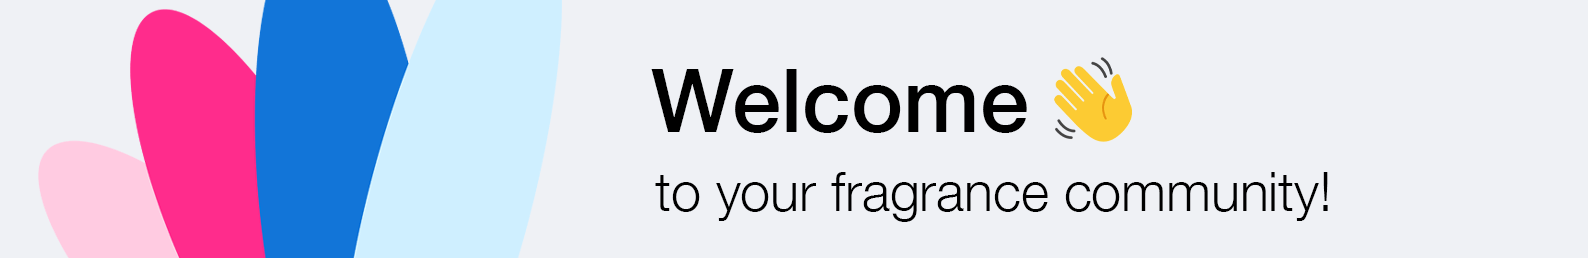 Welcome to your fragrance community!